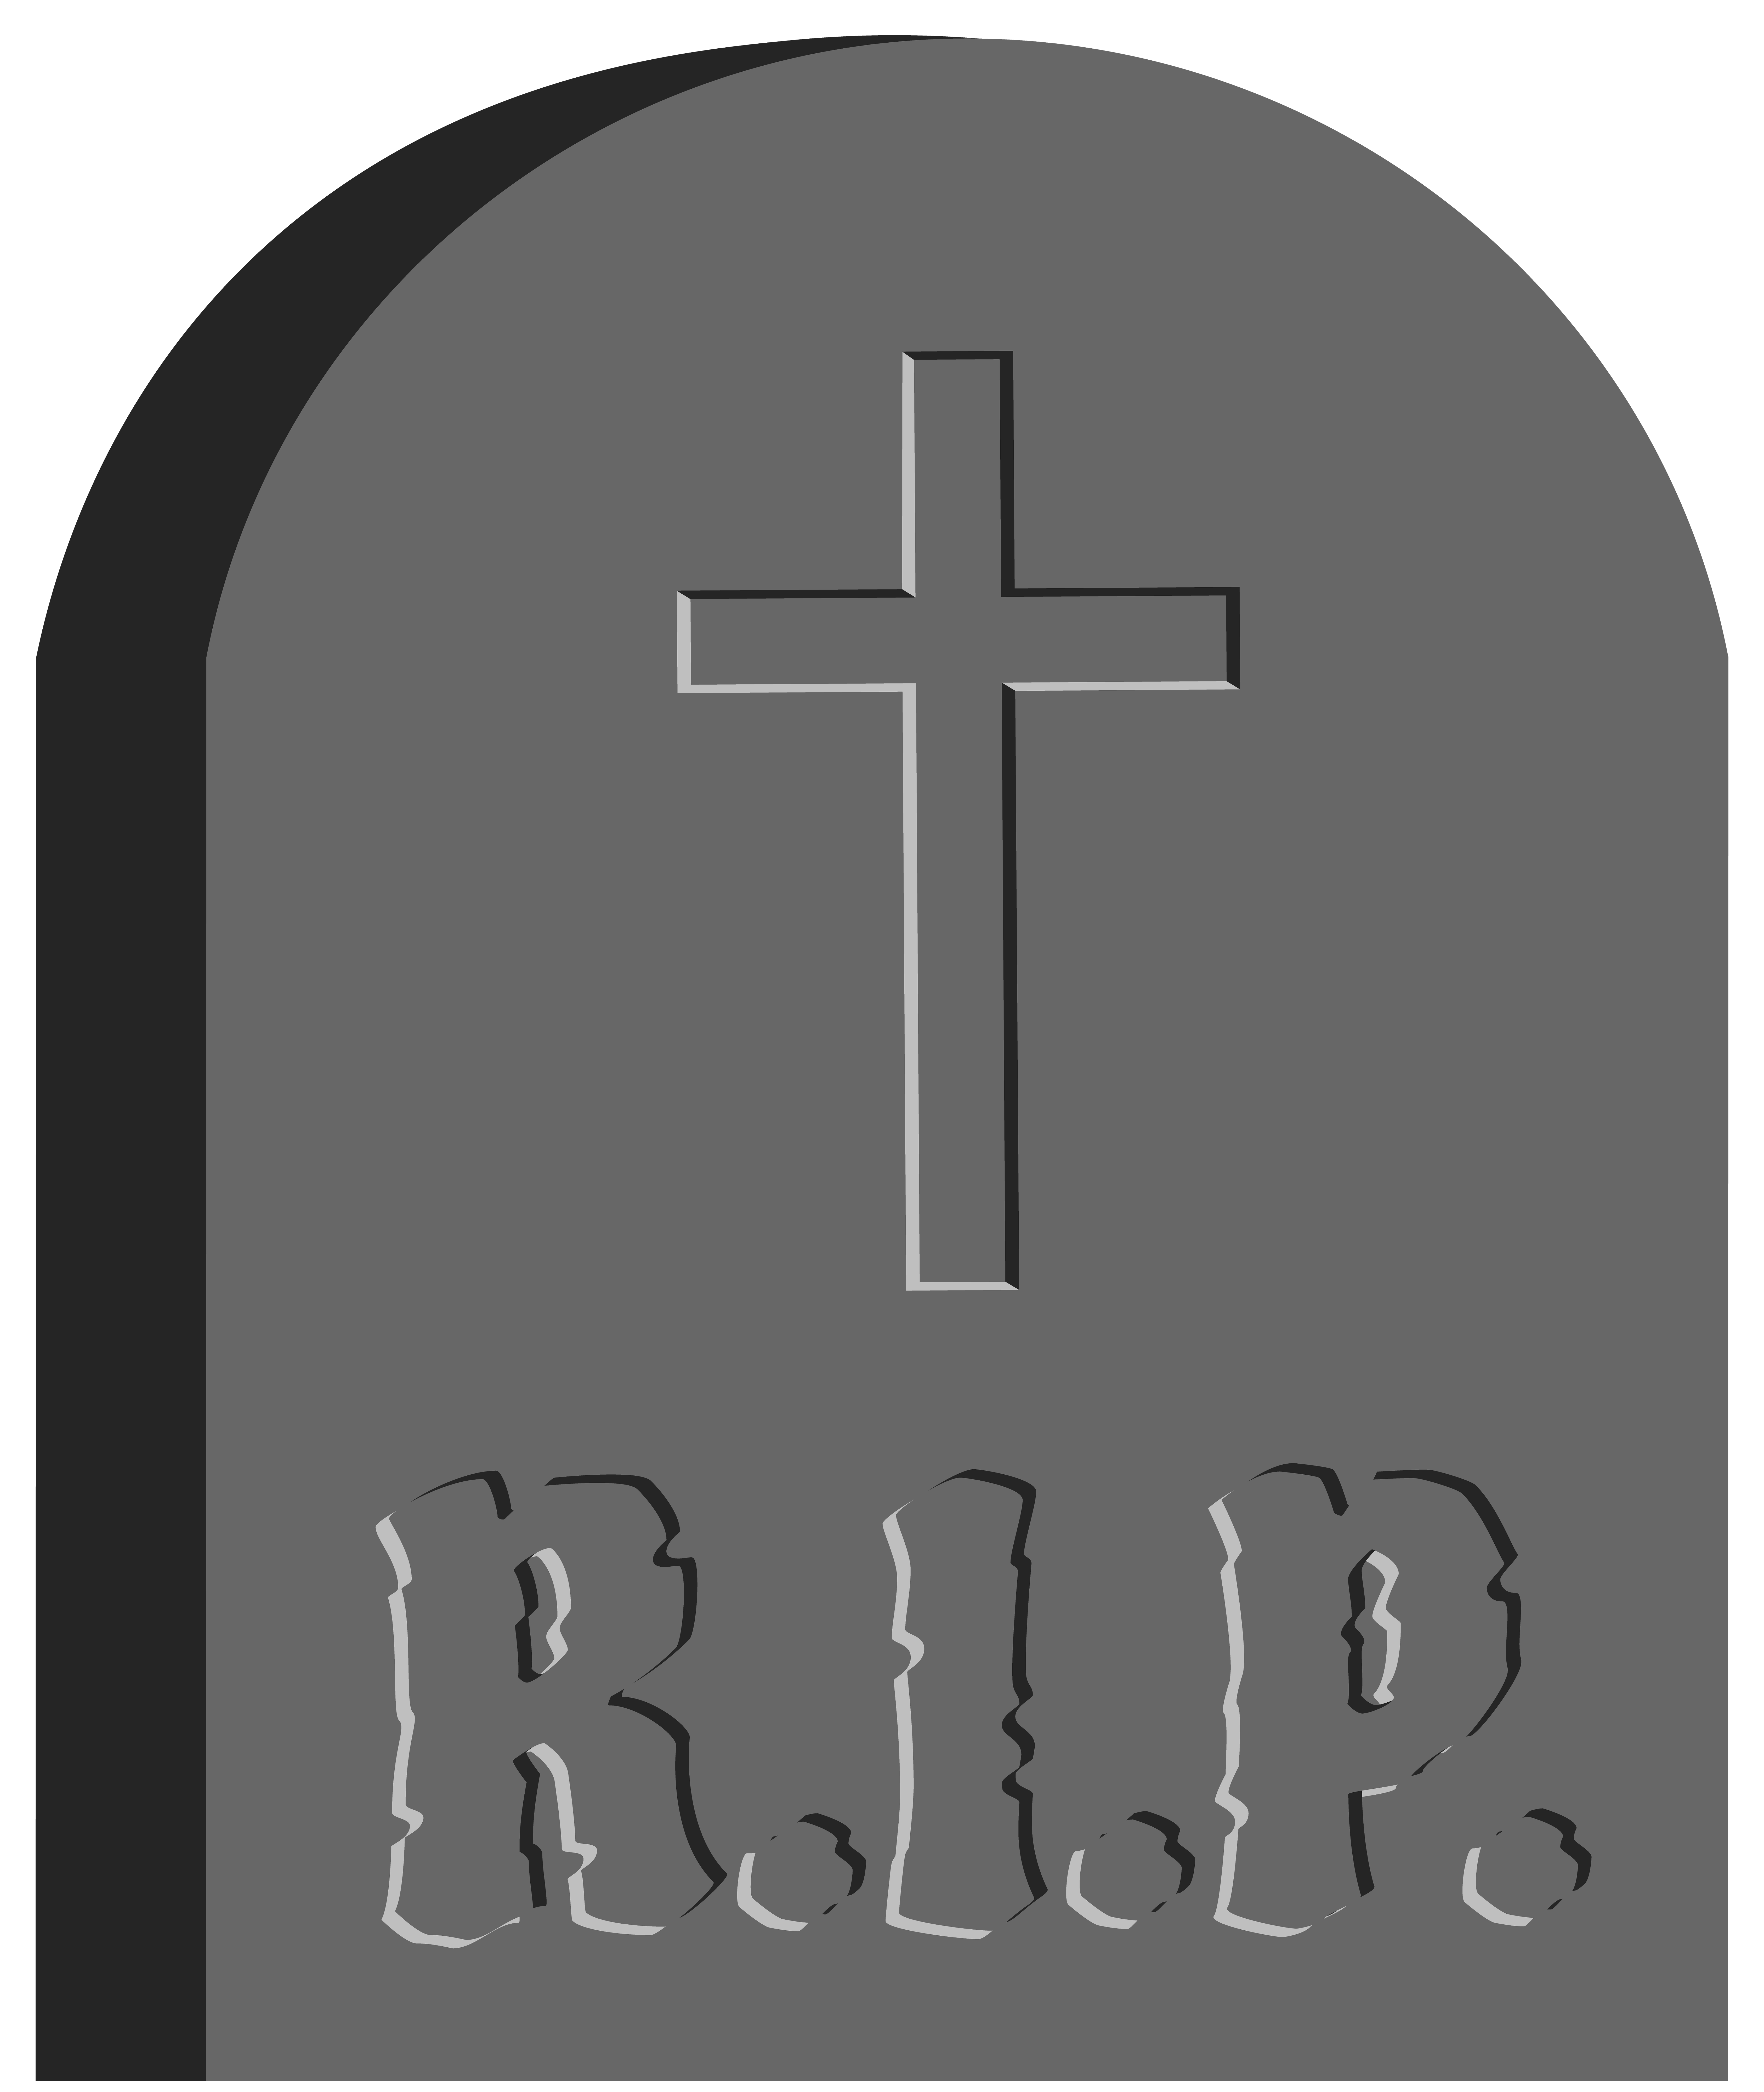 Rip Tombstone Fun For Halloween PNG Transparent Background, Free Download  #4475 - FreeIconsPNG